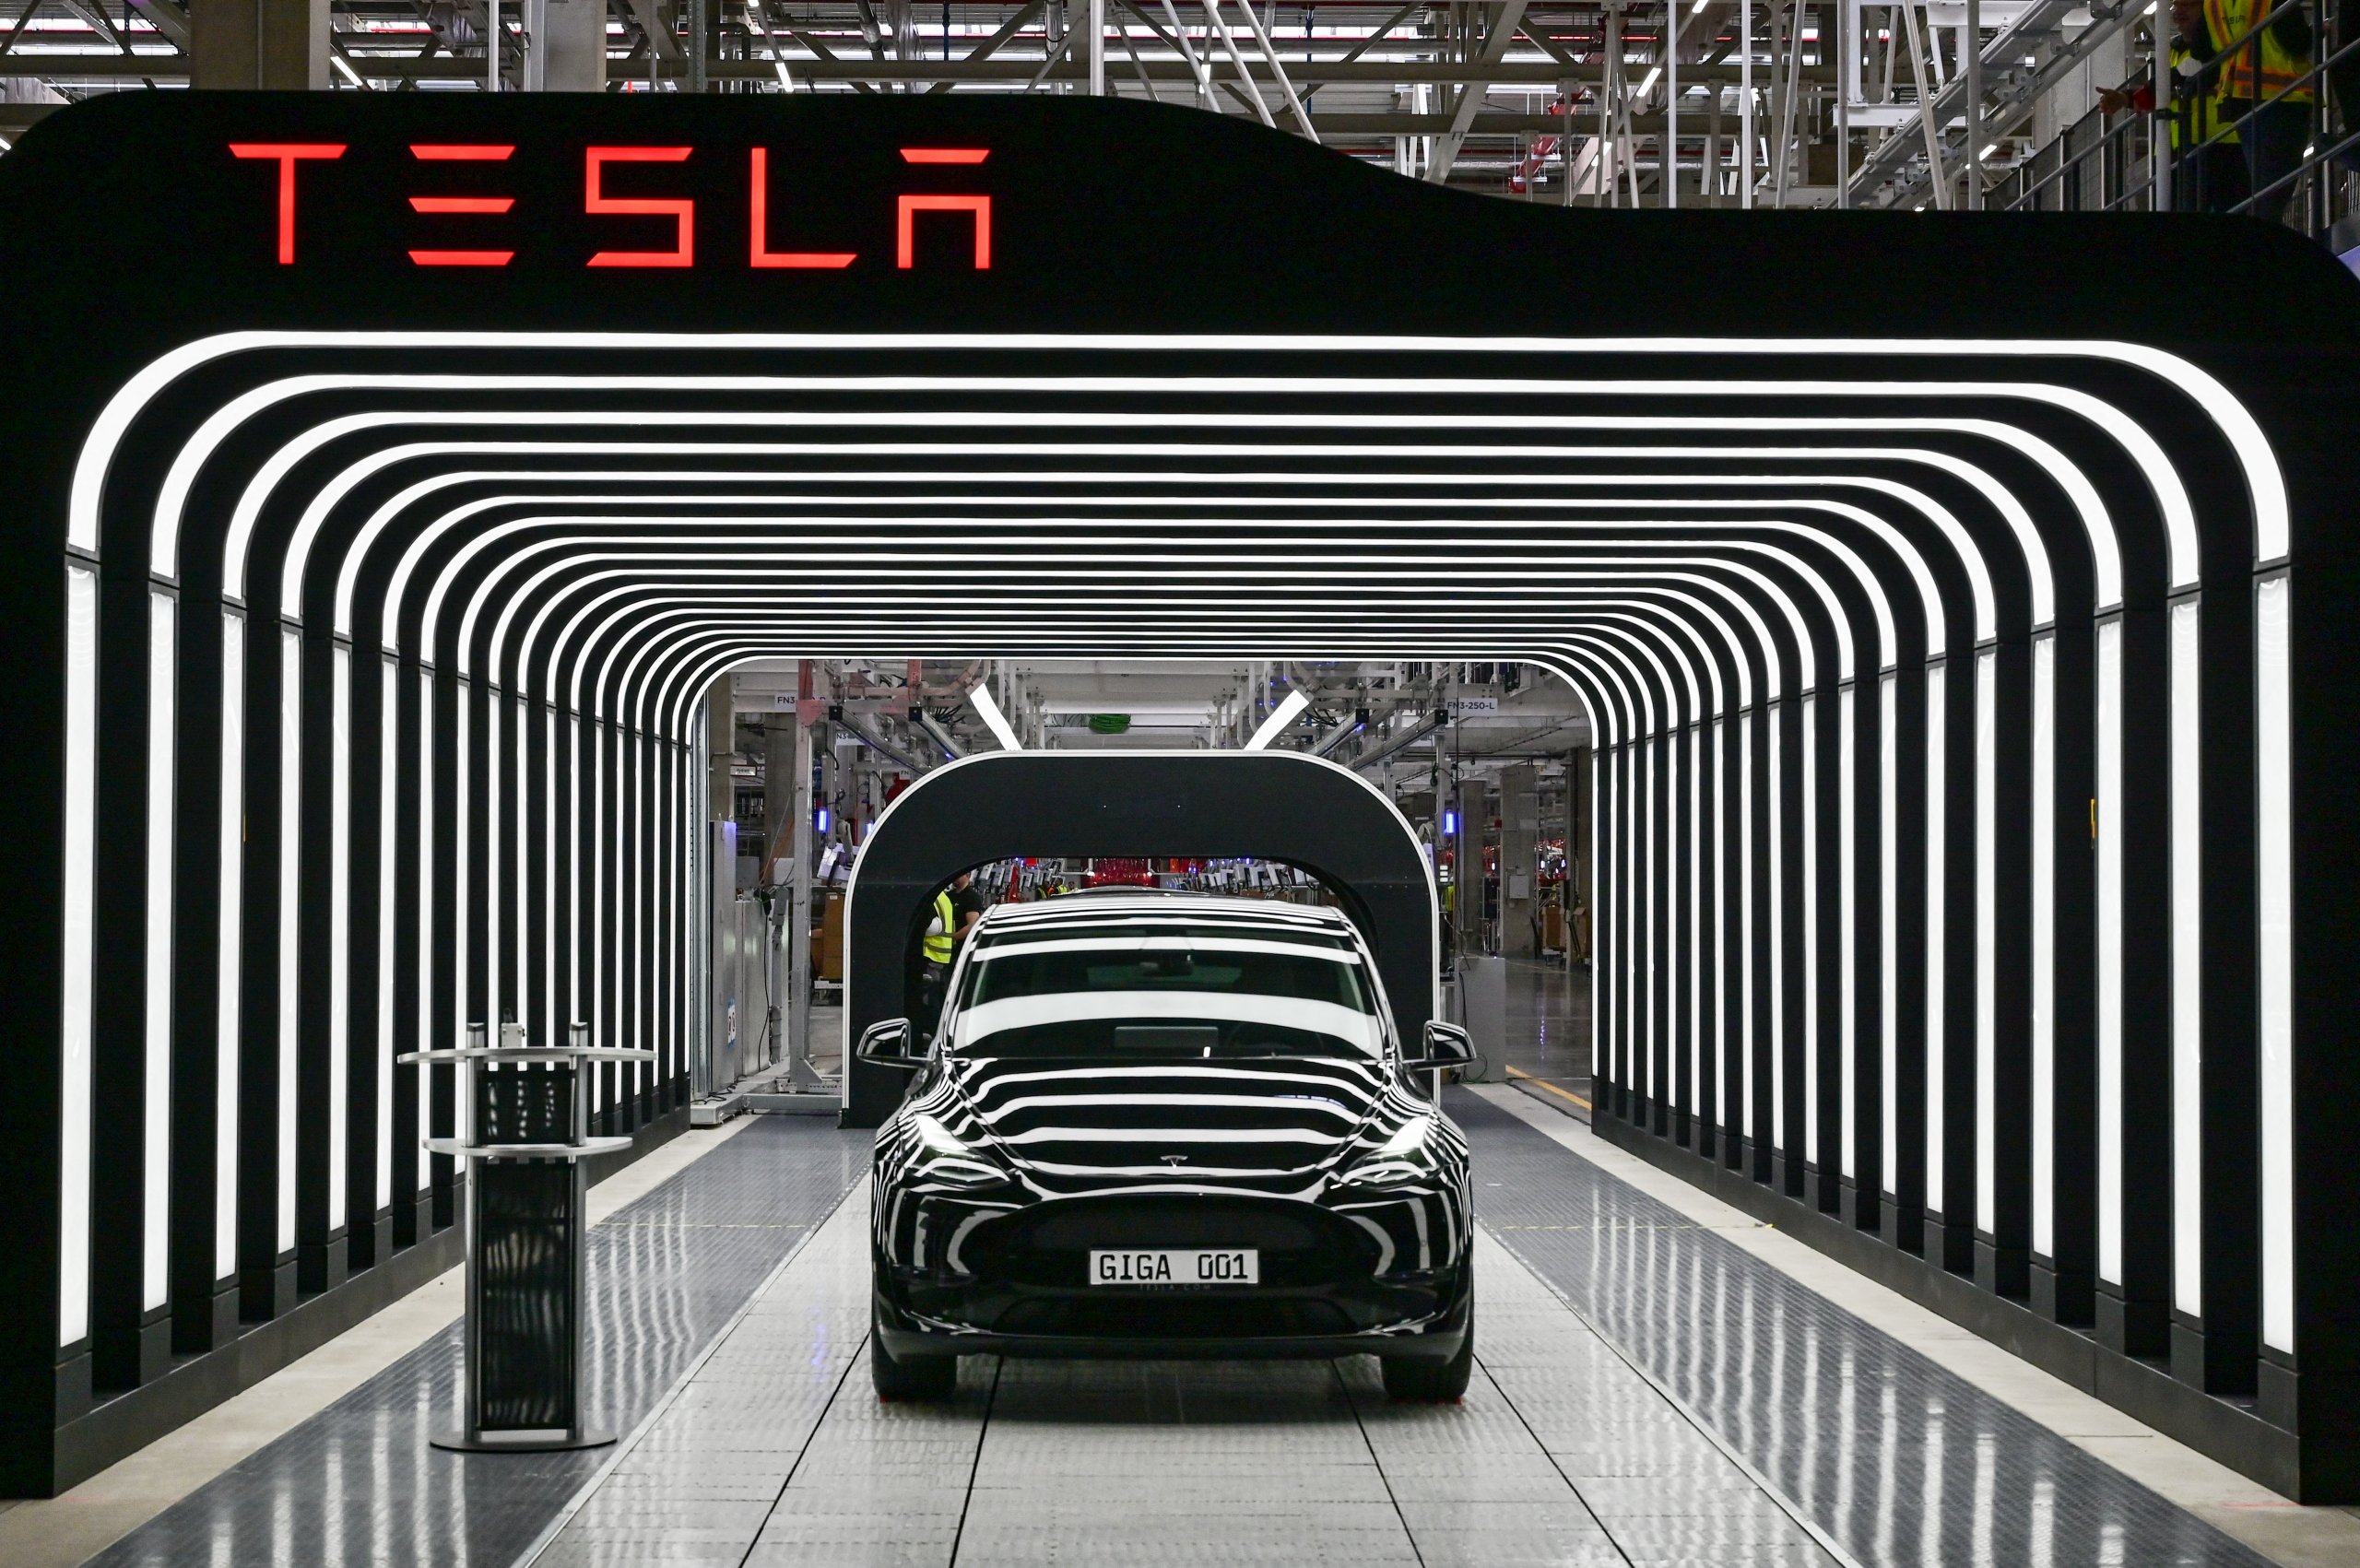 Since starting with a car plant in Silicon Valley, Tesla has gone global with its gigafactory output in Berlin and Shanghai as well as in the US states, New York and Nevada